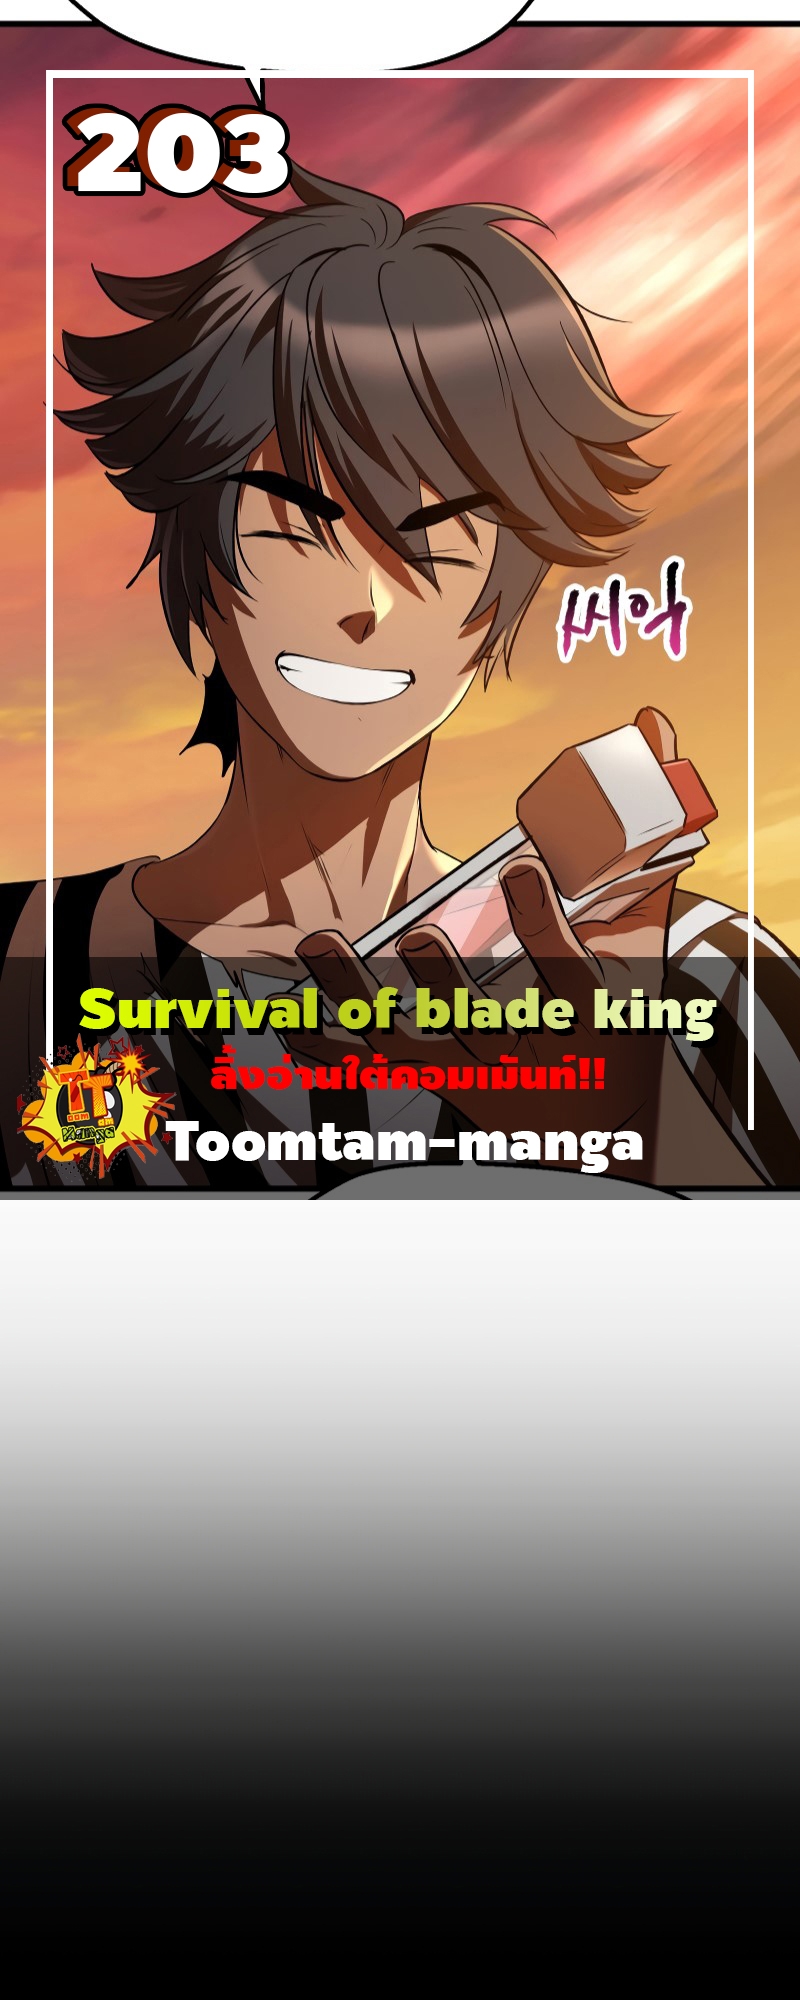 Survival of blade king 203 27 04 25670001